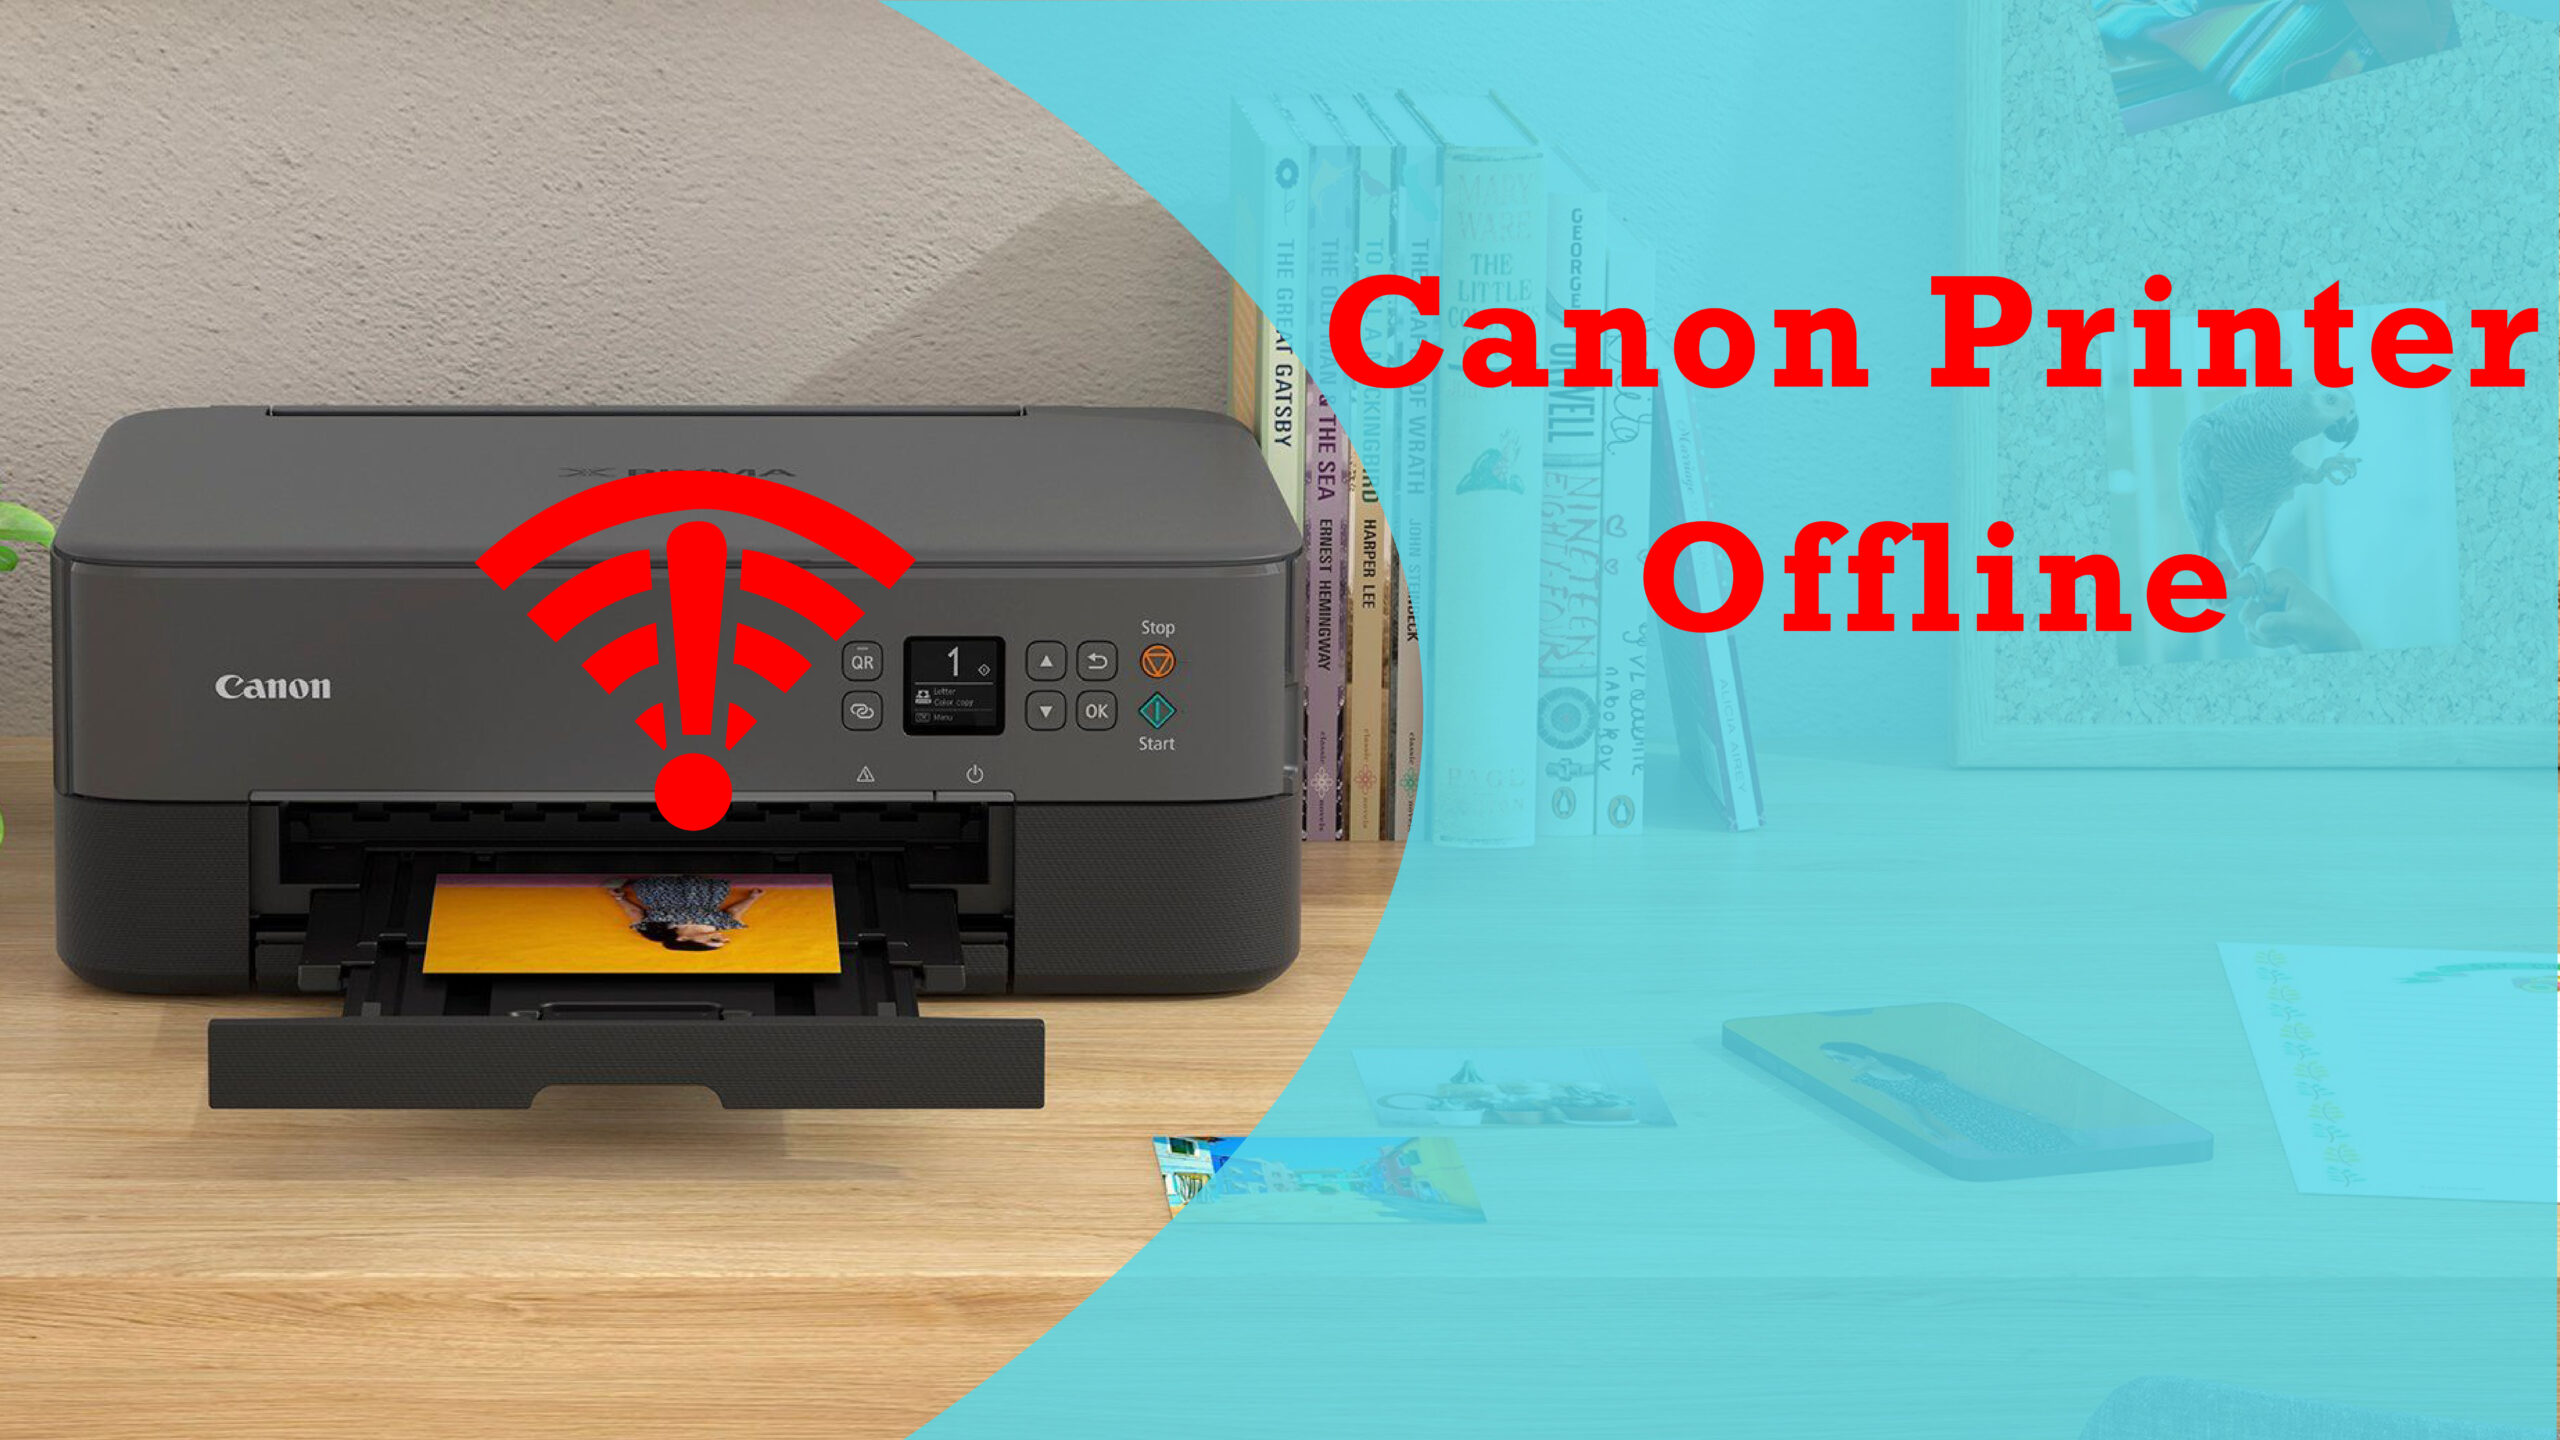 How to fix Canon Printer offline Issue - [Complete Guide]